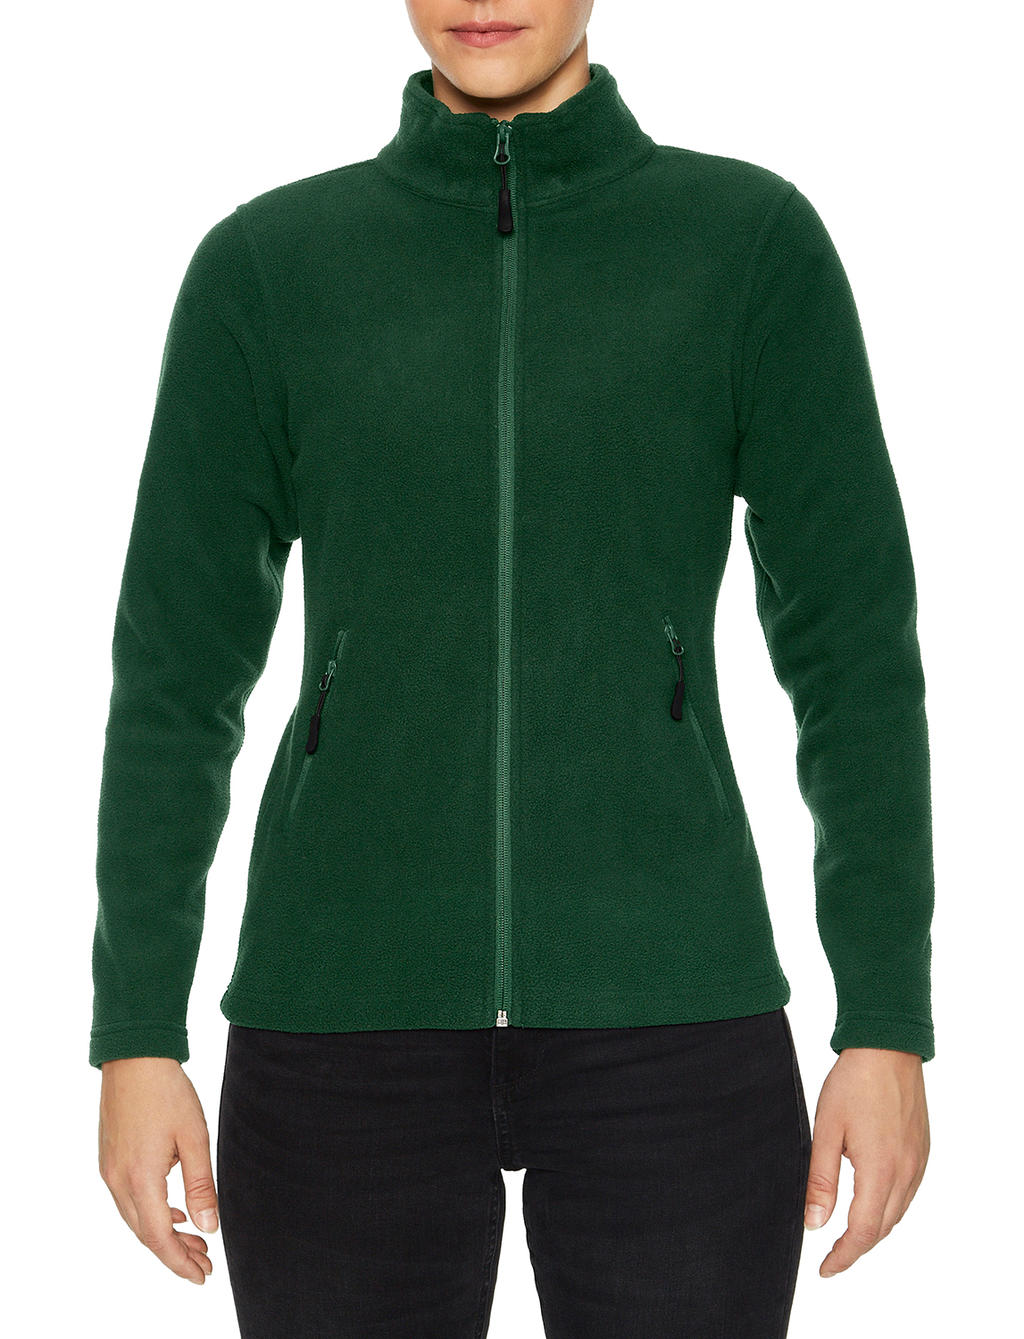  Hammer? Ladies Micro-Fleece Jacket in Farbe Forest Green